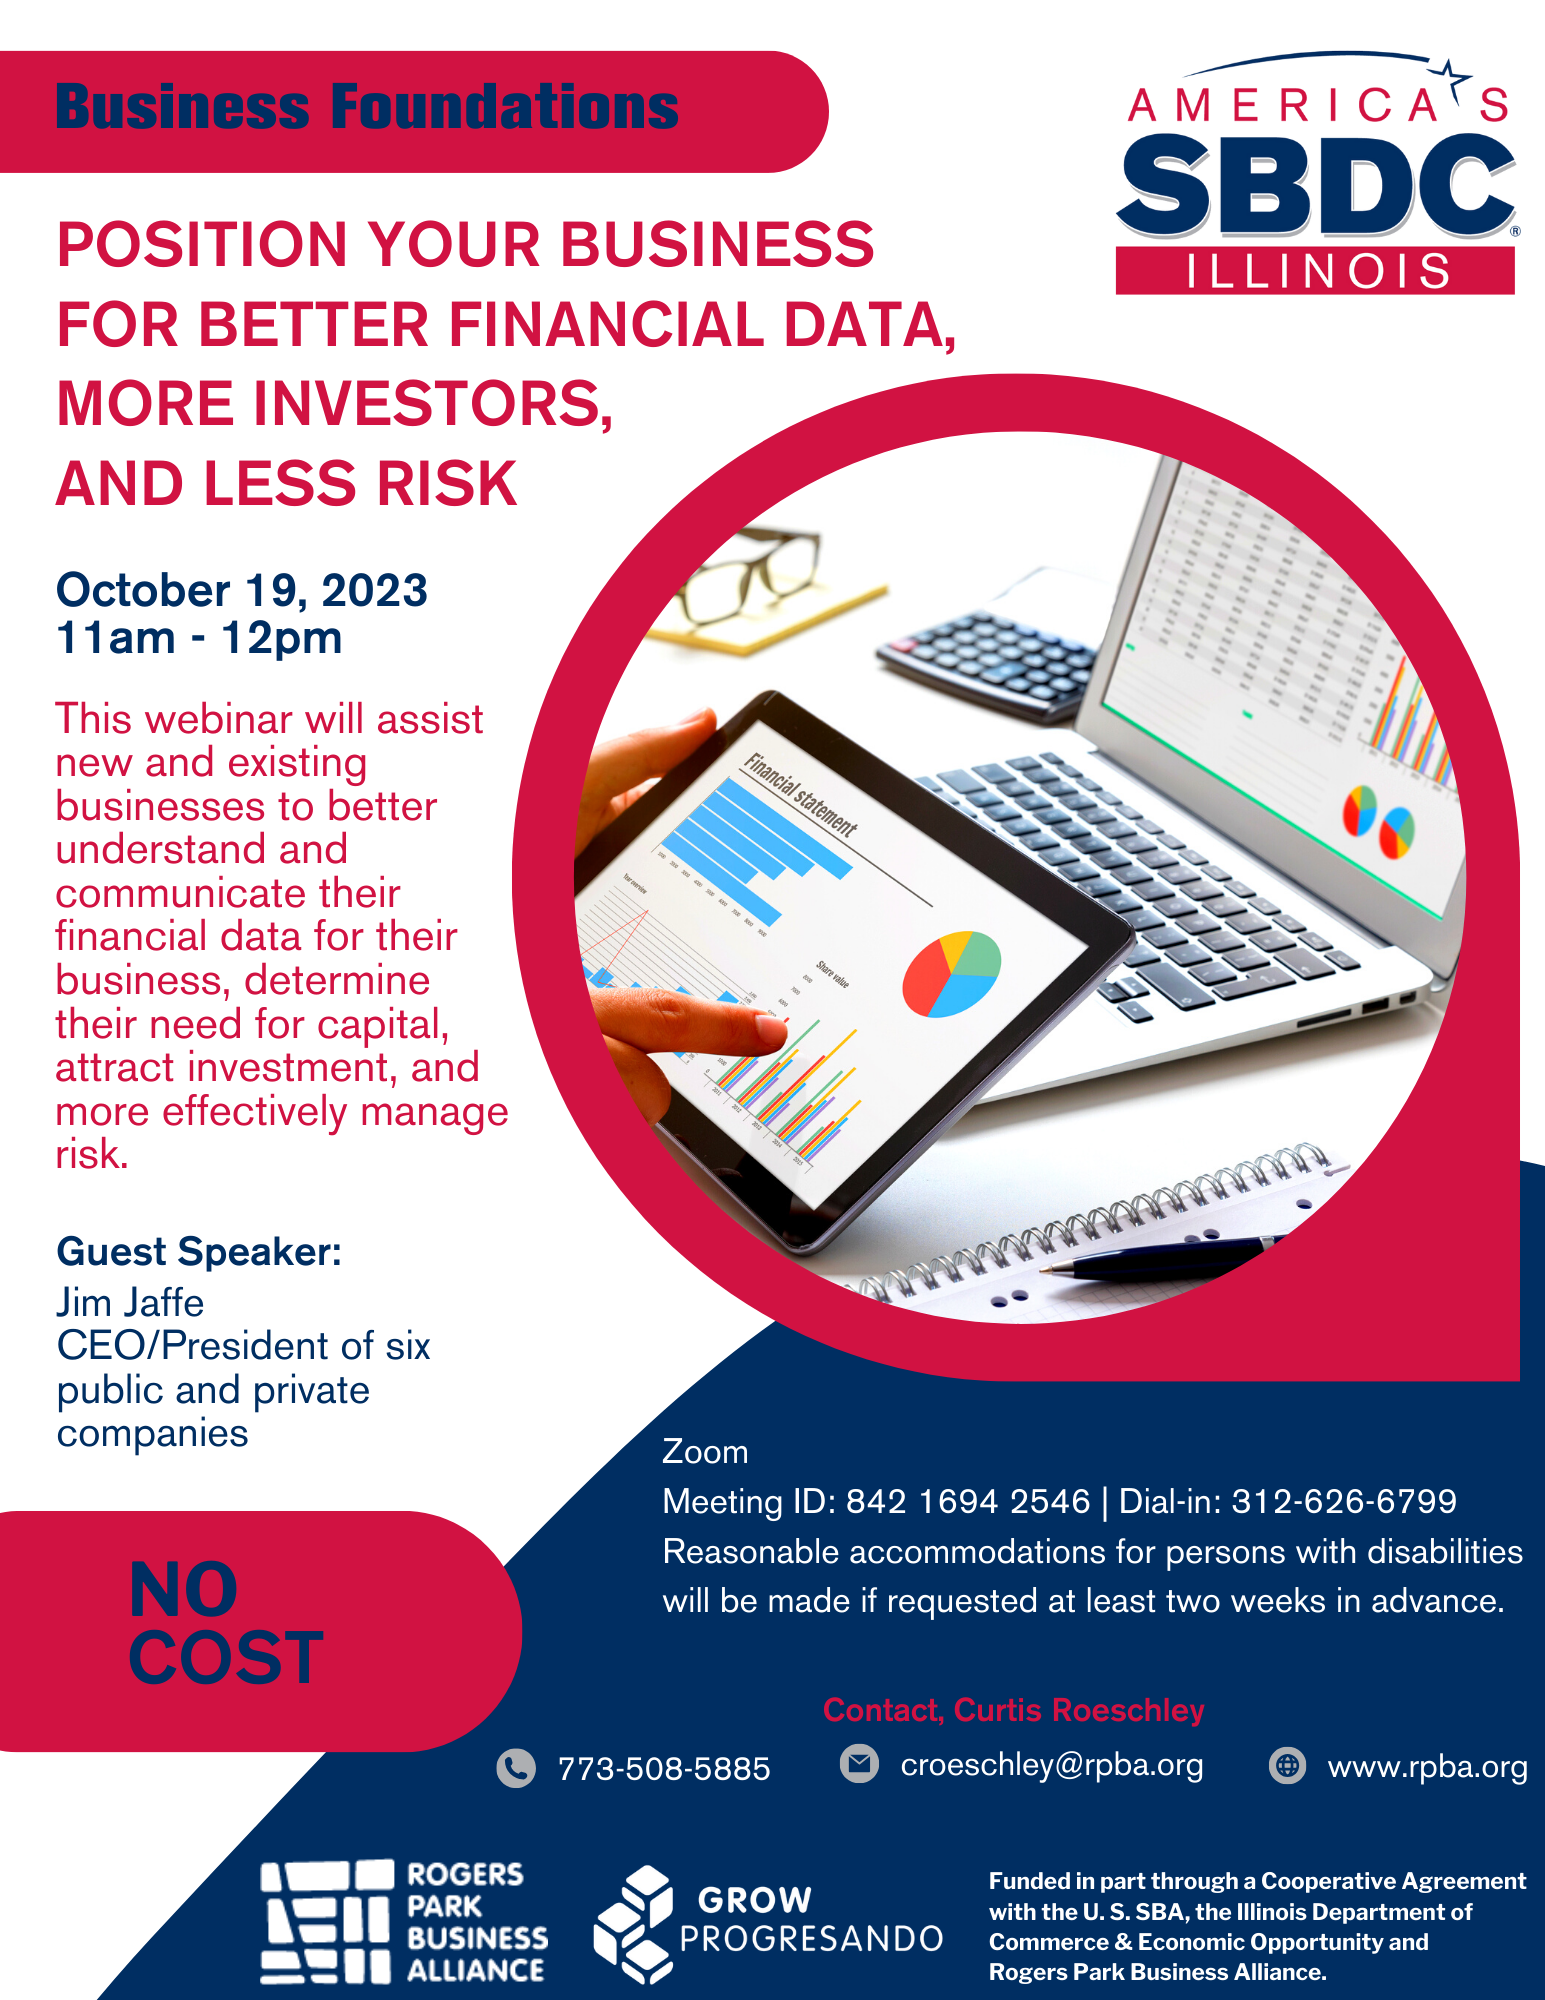 Business Foundations | Position Your Business for Better Financial Data, More Investors, and Less Risk, rogers-park-business-alliance